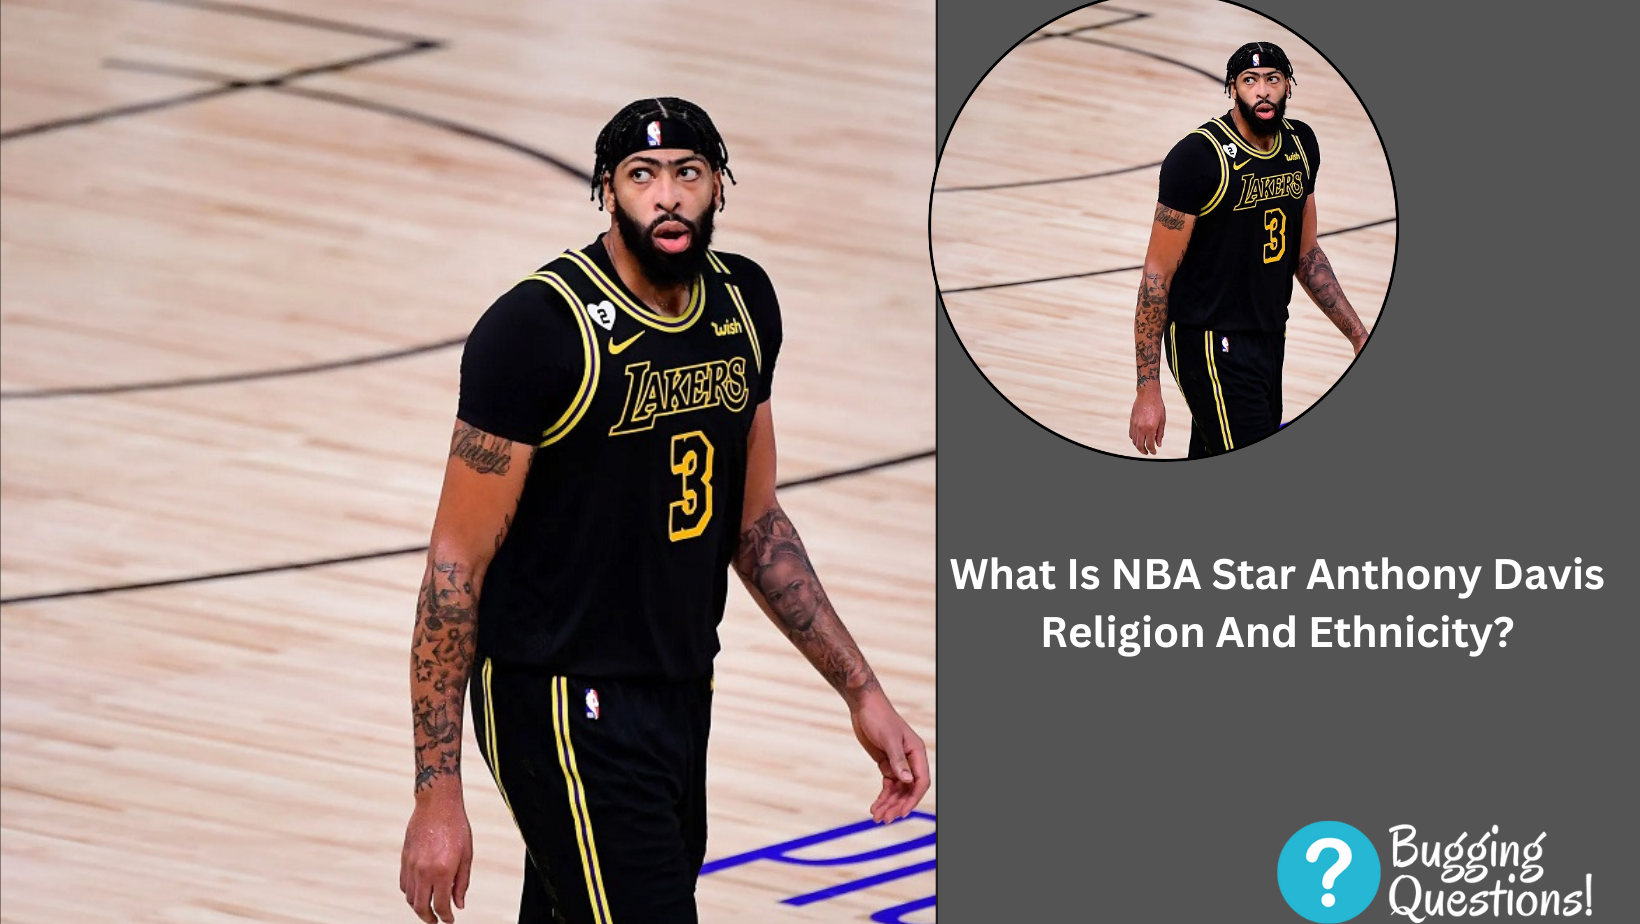 What Is NBA Star Anthony Davis Religion And Ethnicity?